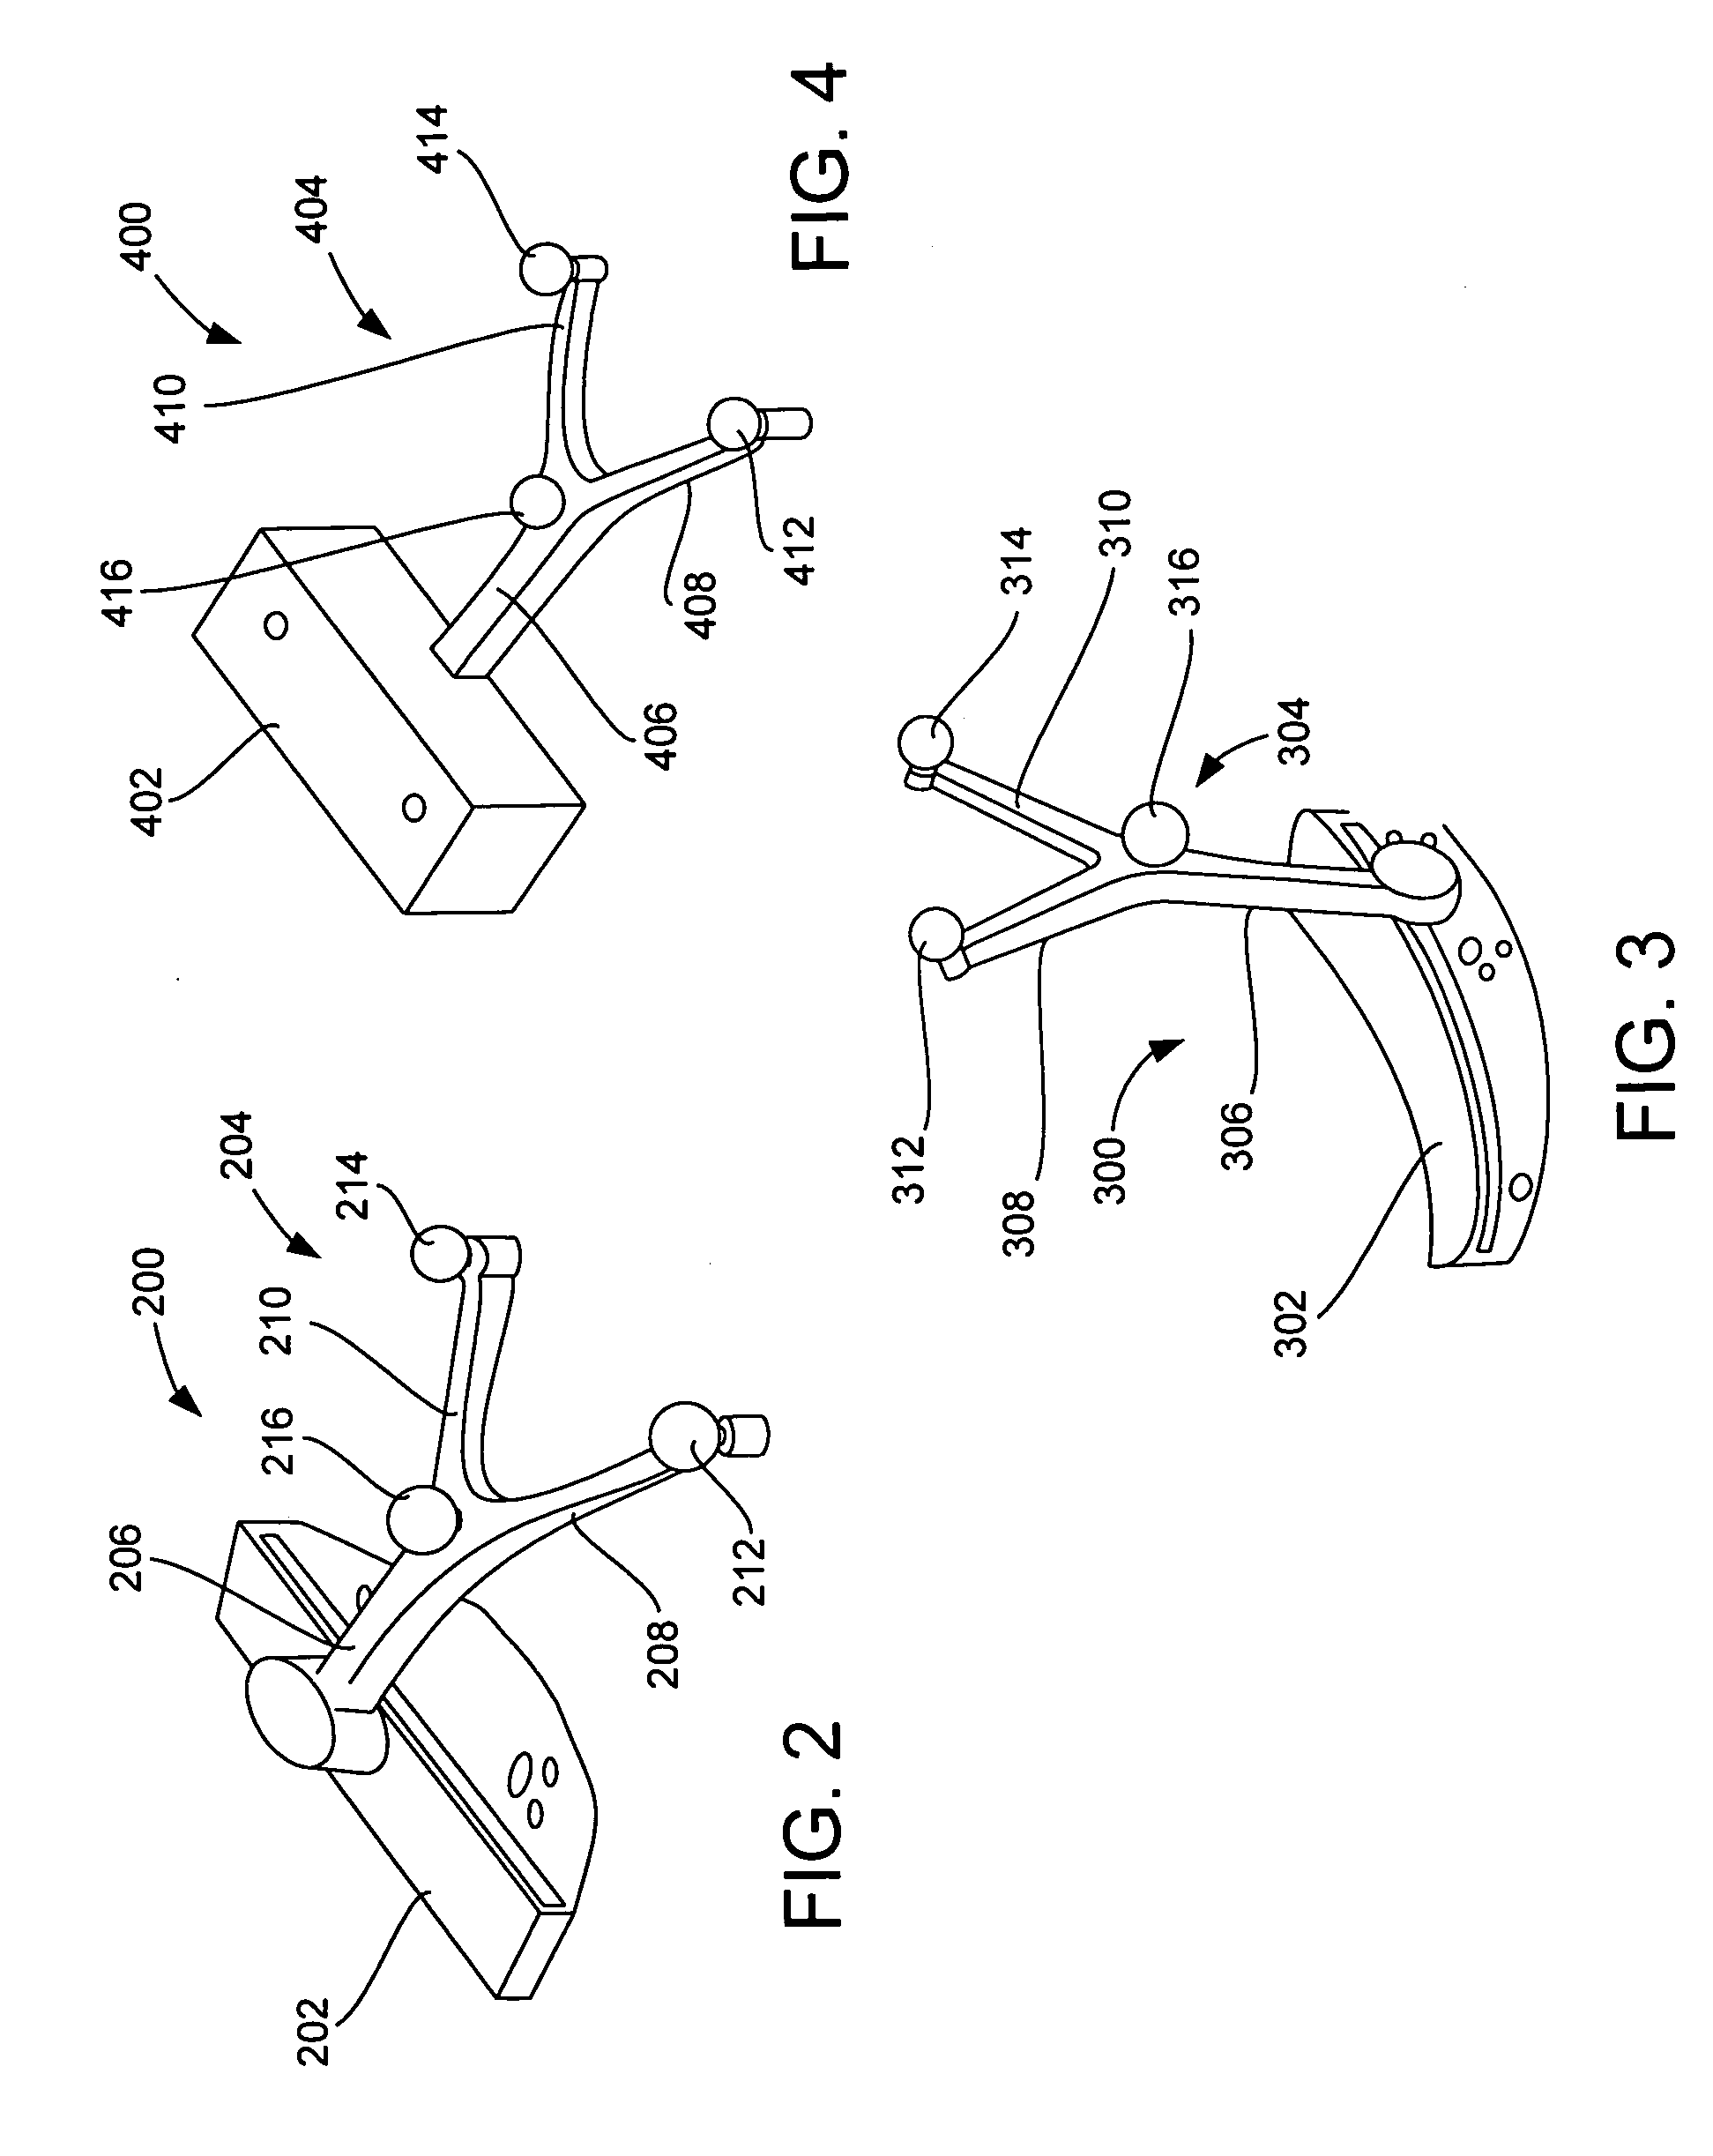 Systems, methods, and apparatus for automatic software flow using instrument detection during computer-aided surgery